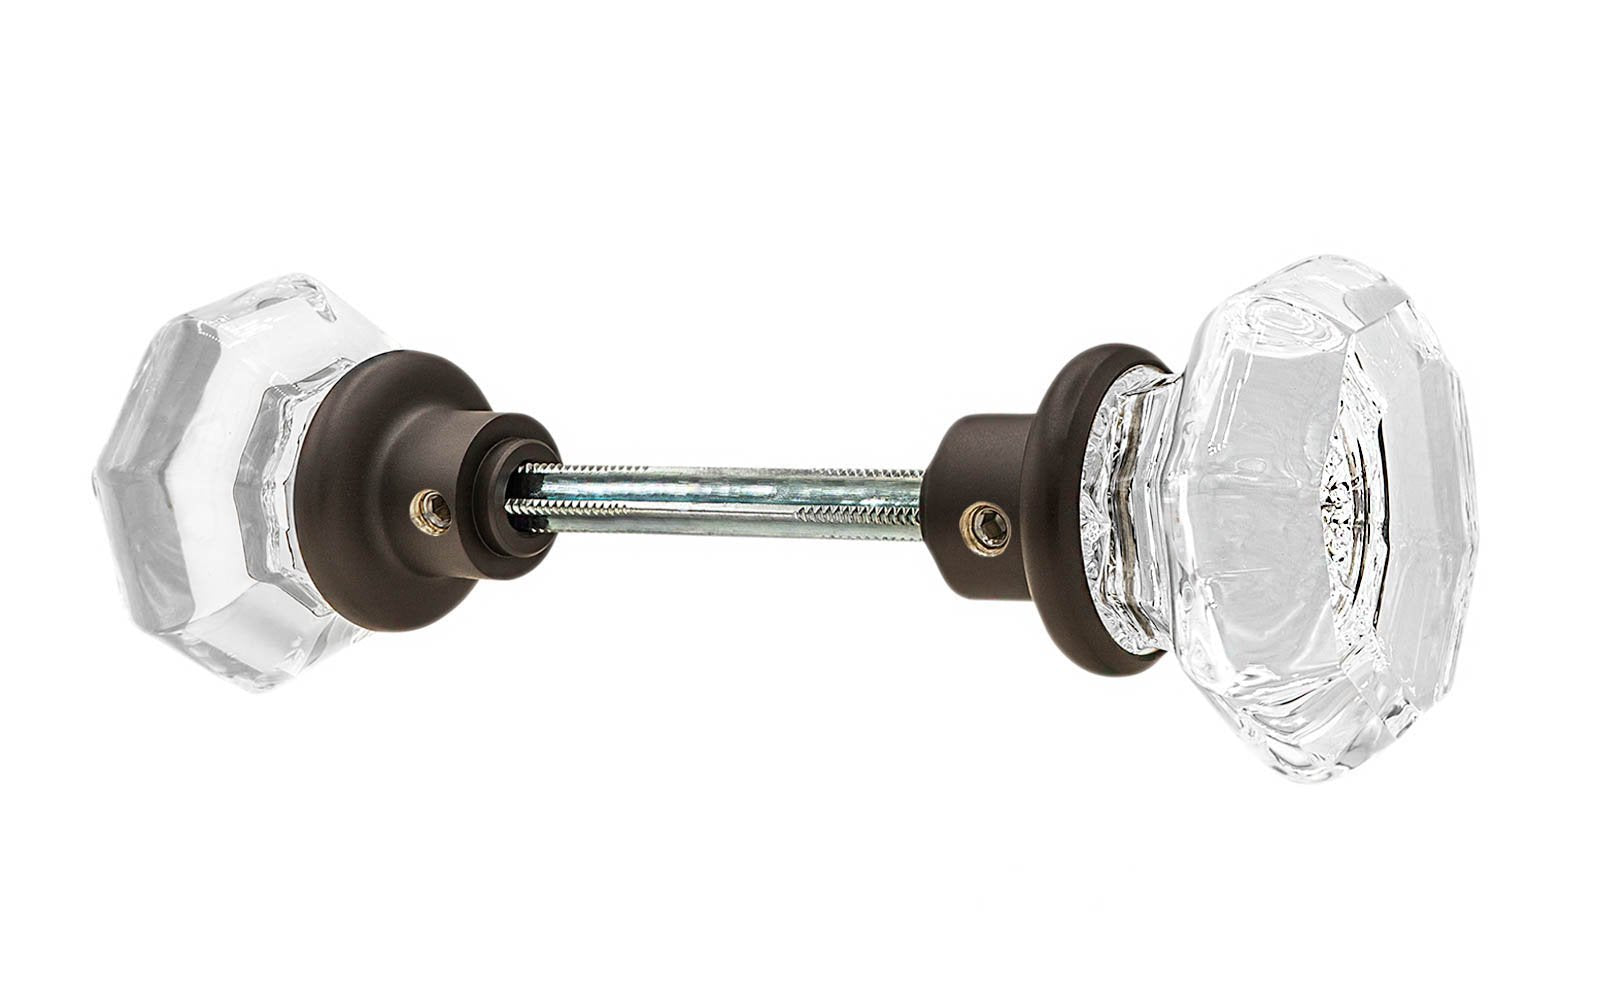 A high quality & genuine glass doorknob set with an attractive octagonal design. The sparkling center point under the glass amplifies reflected light to showcase beautiful facets. The rim of the brass base folds over the base of the glass knob for a secure grip. Oil Rubbed Bronze Finish